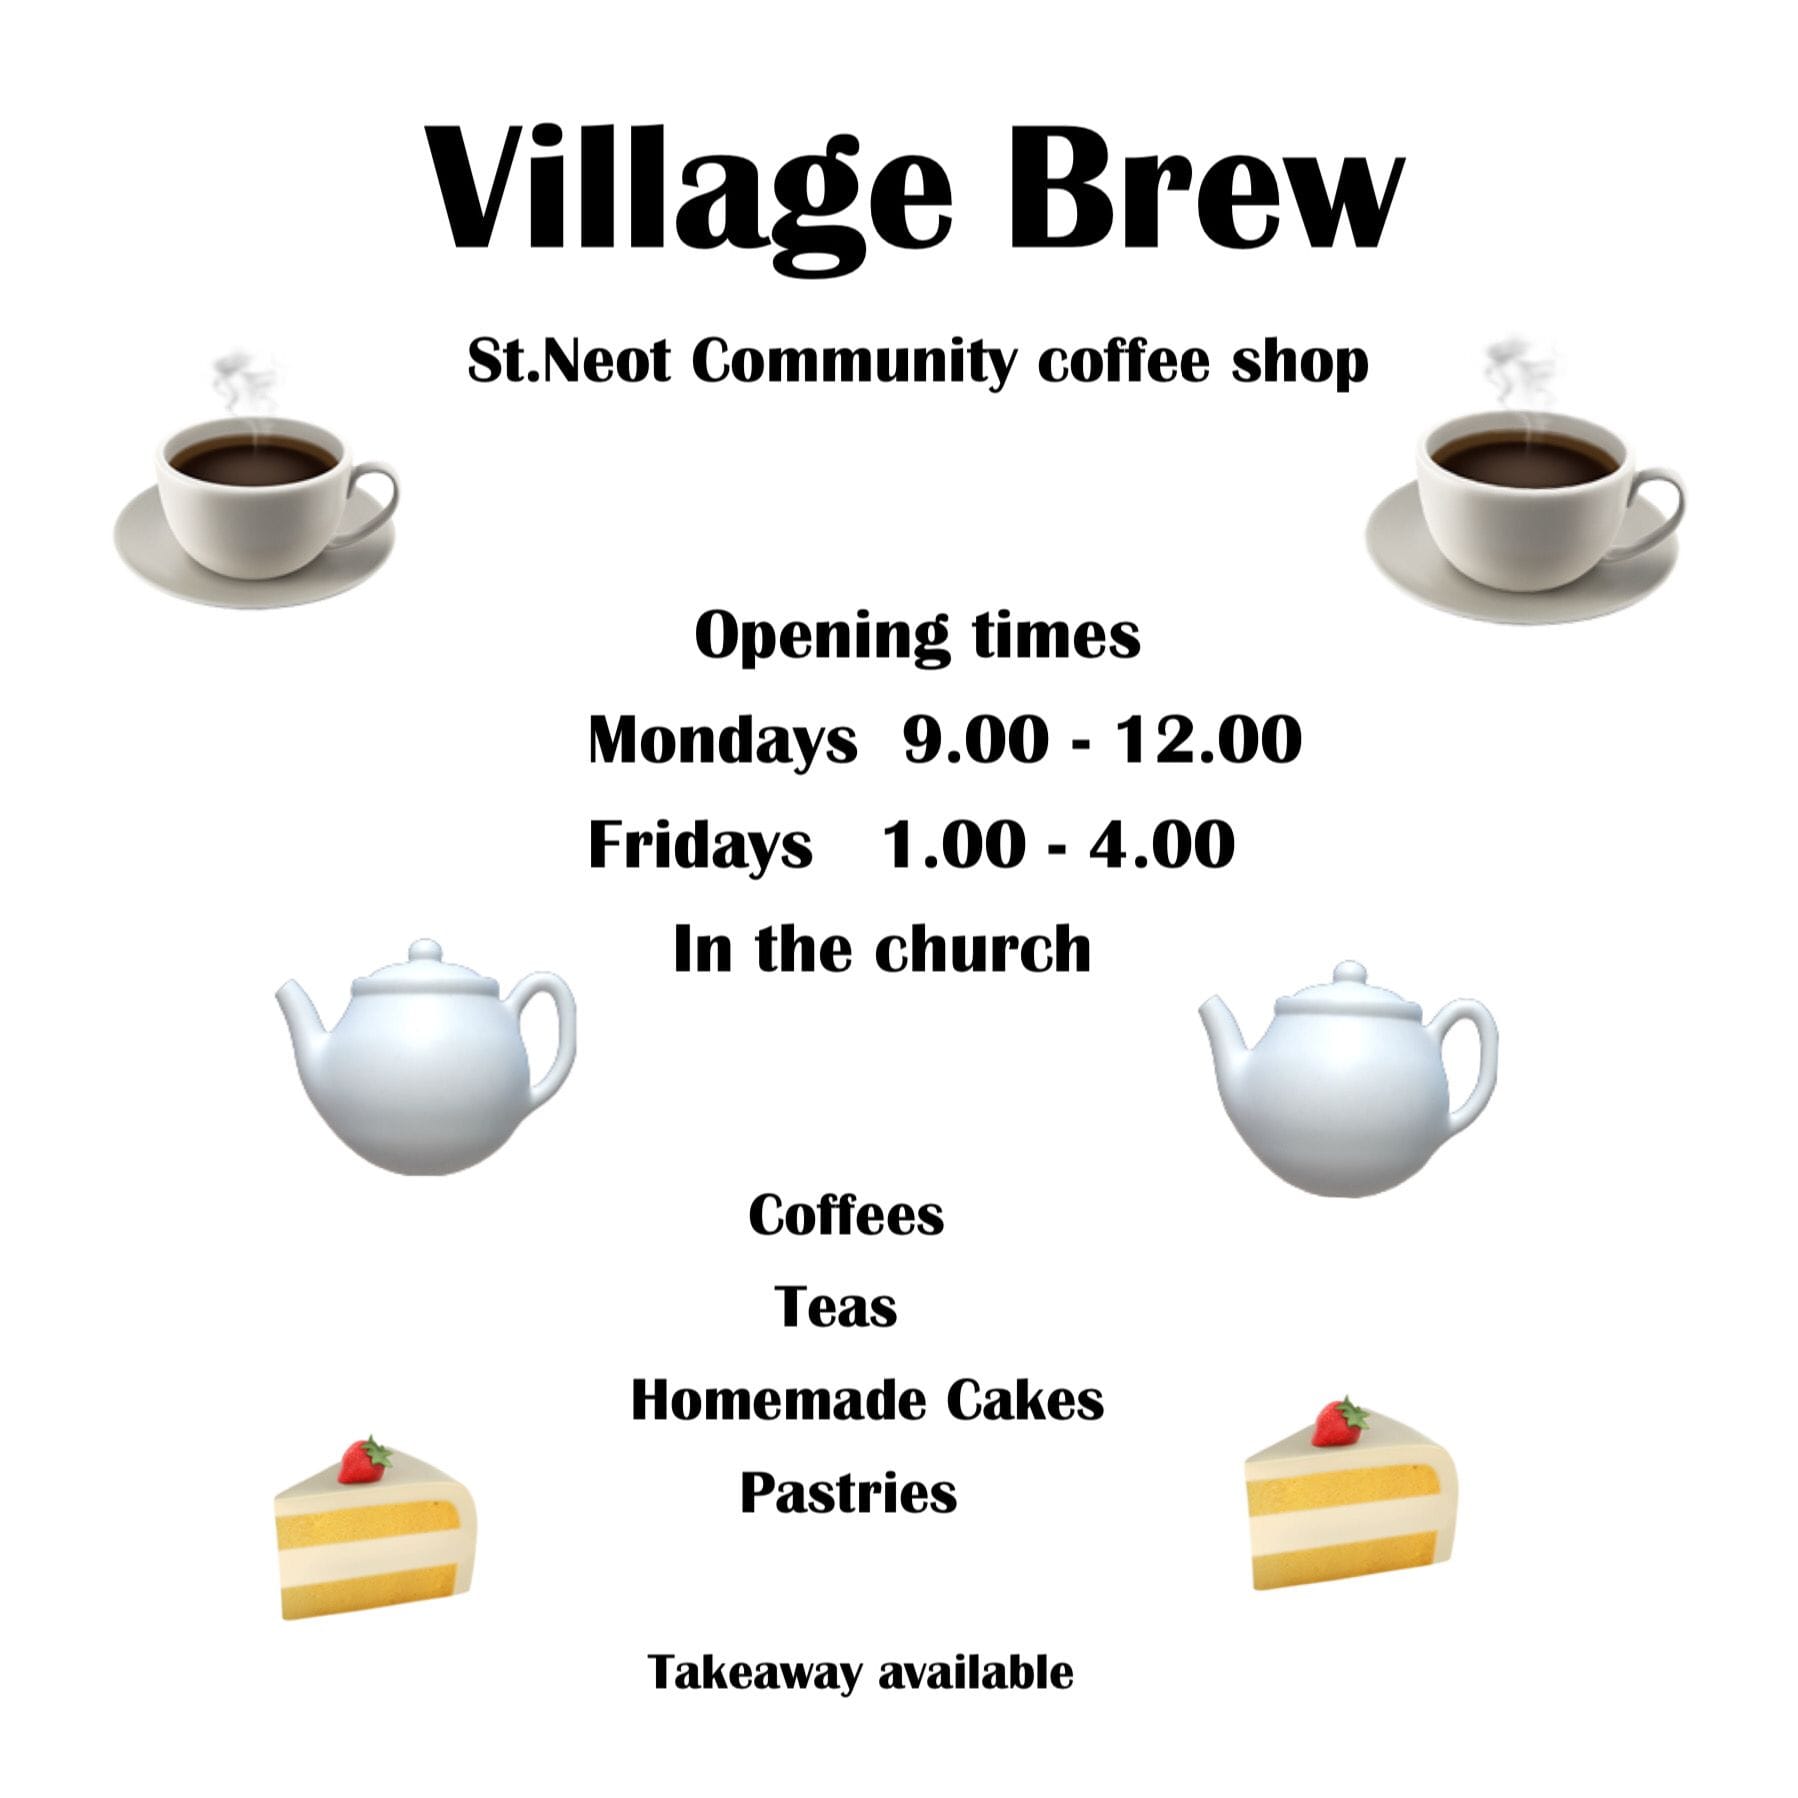 Village Brrew opening times